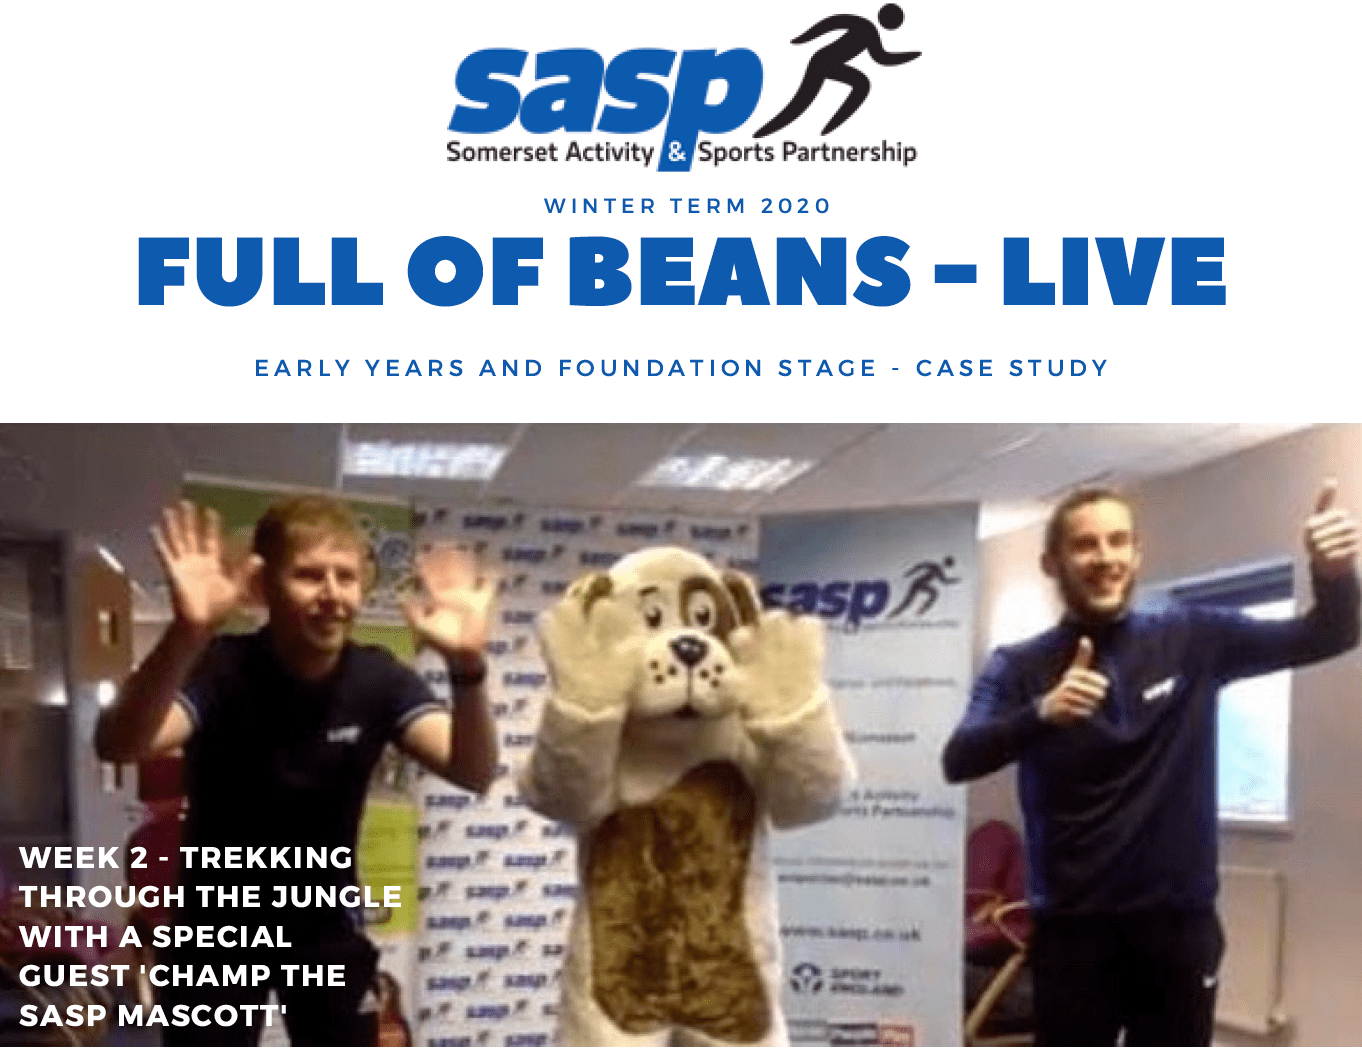 Champ the SASP mascot dog and two male instructions doing activities as part of live sessions